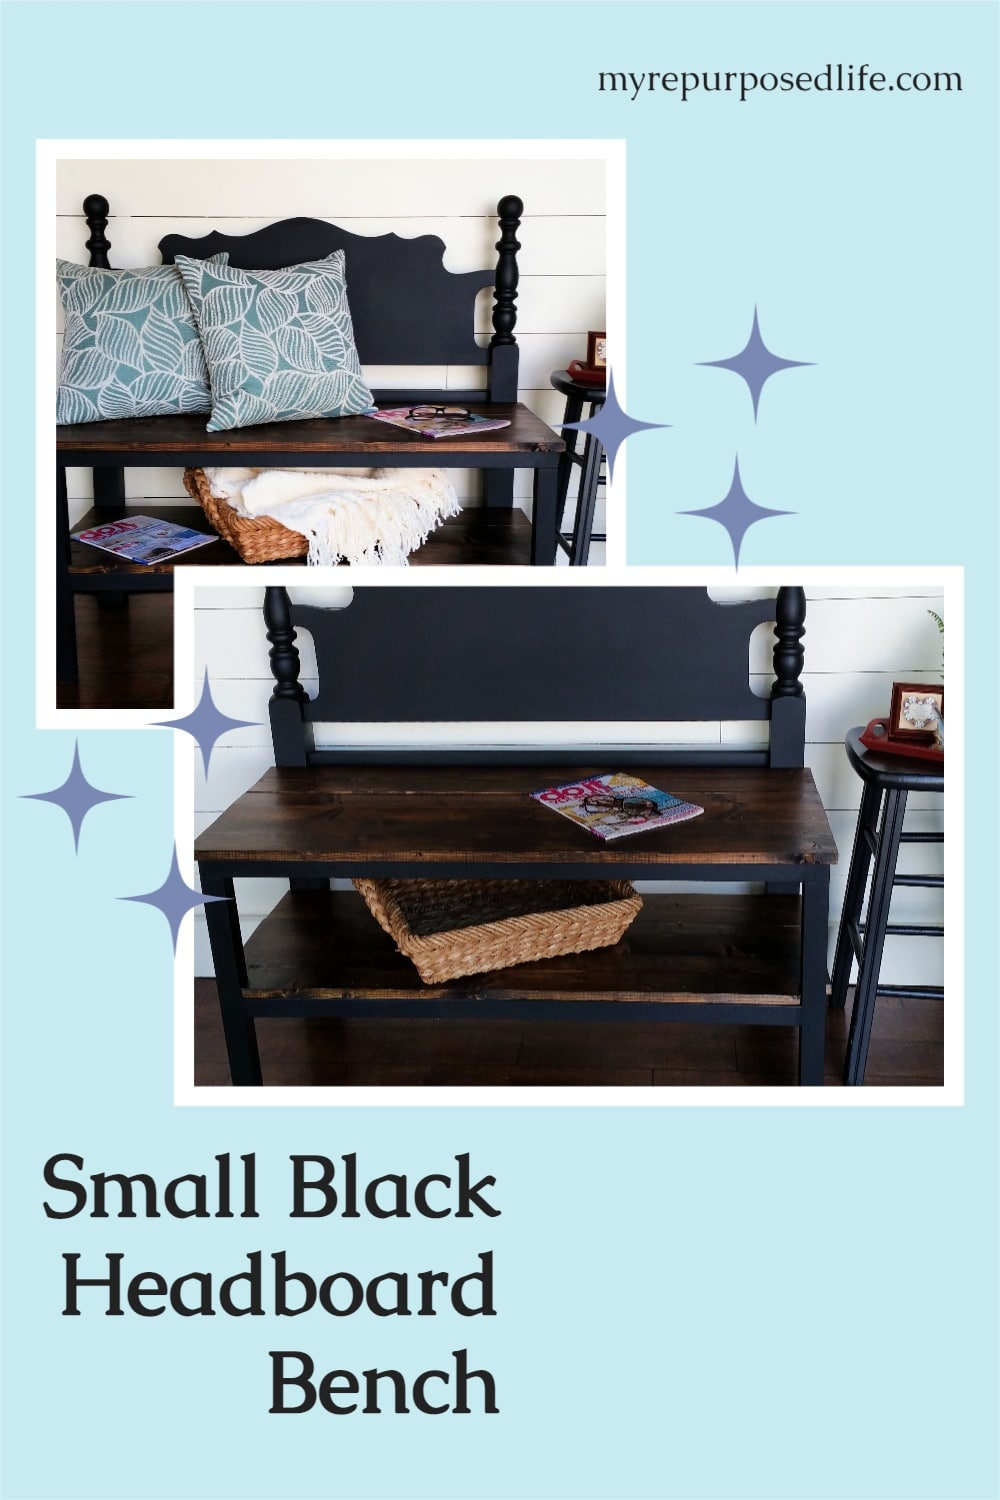 how to make a small black bench for your entryway or end of the bed out of an old, unwanted headboard. Step by step directions so you can make one too. #myrepurposedlife #upcycle #repurpose #headboard #bench #tutorial via @repurposedlife